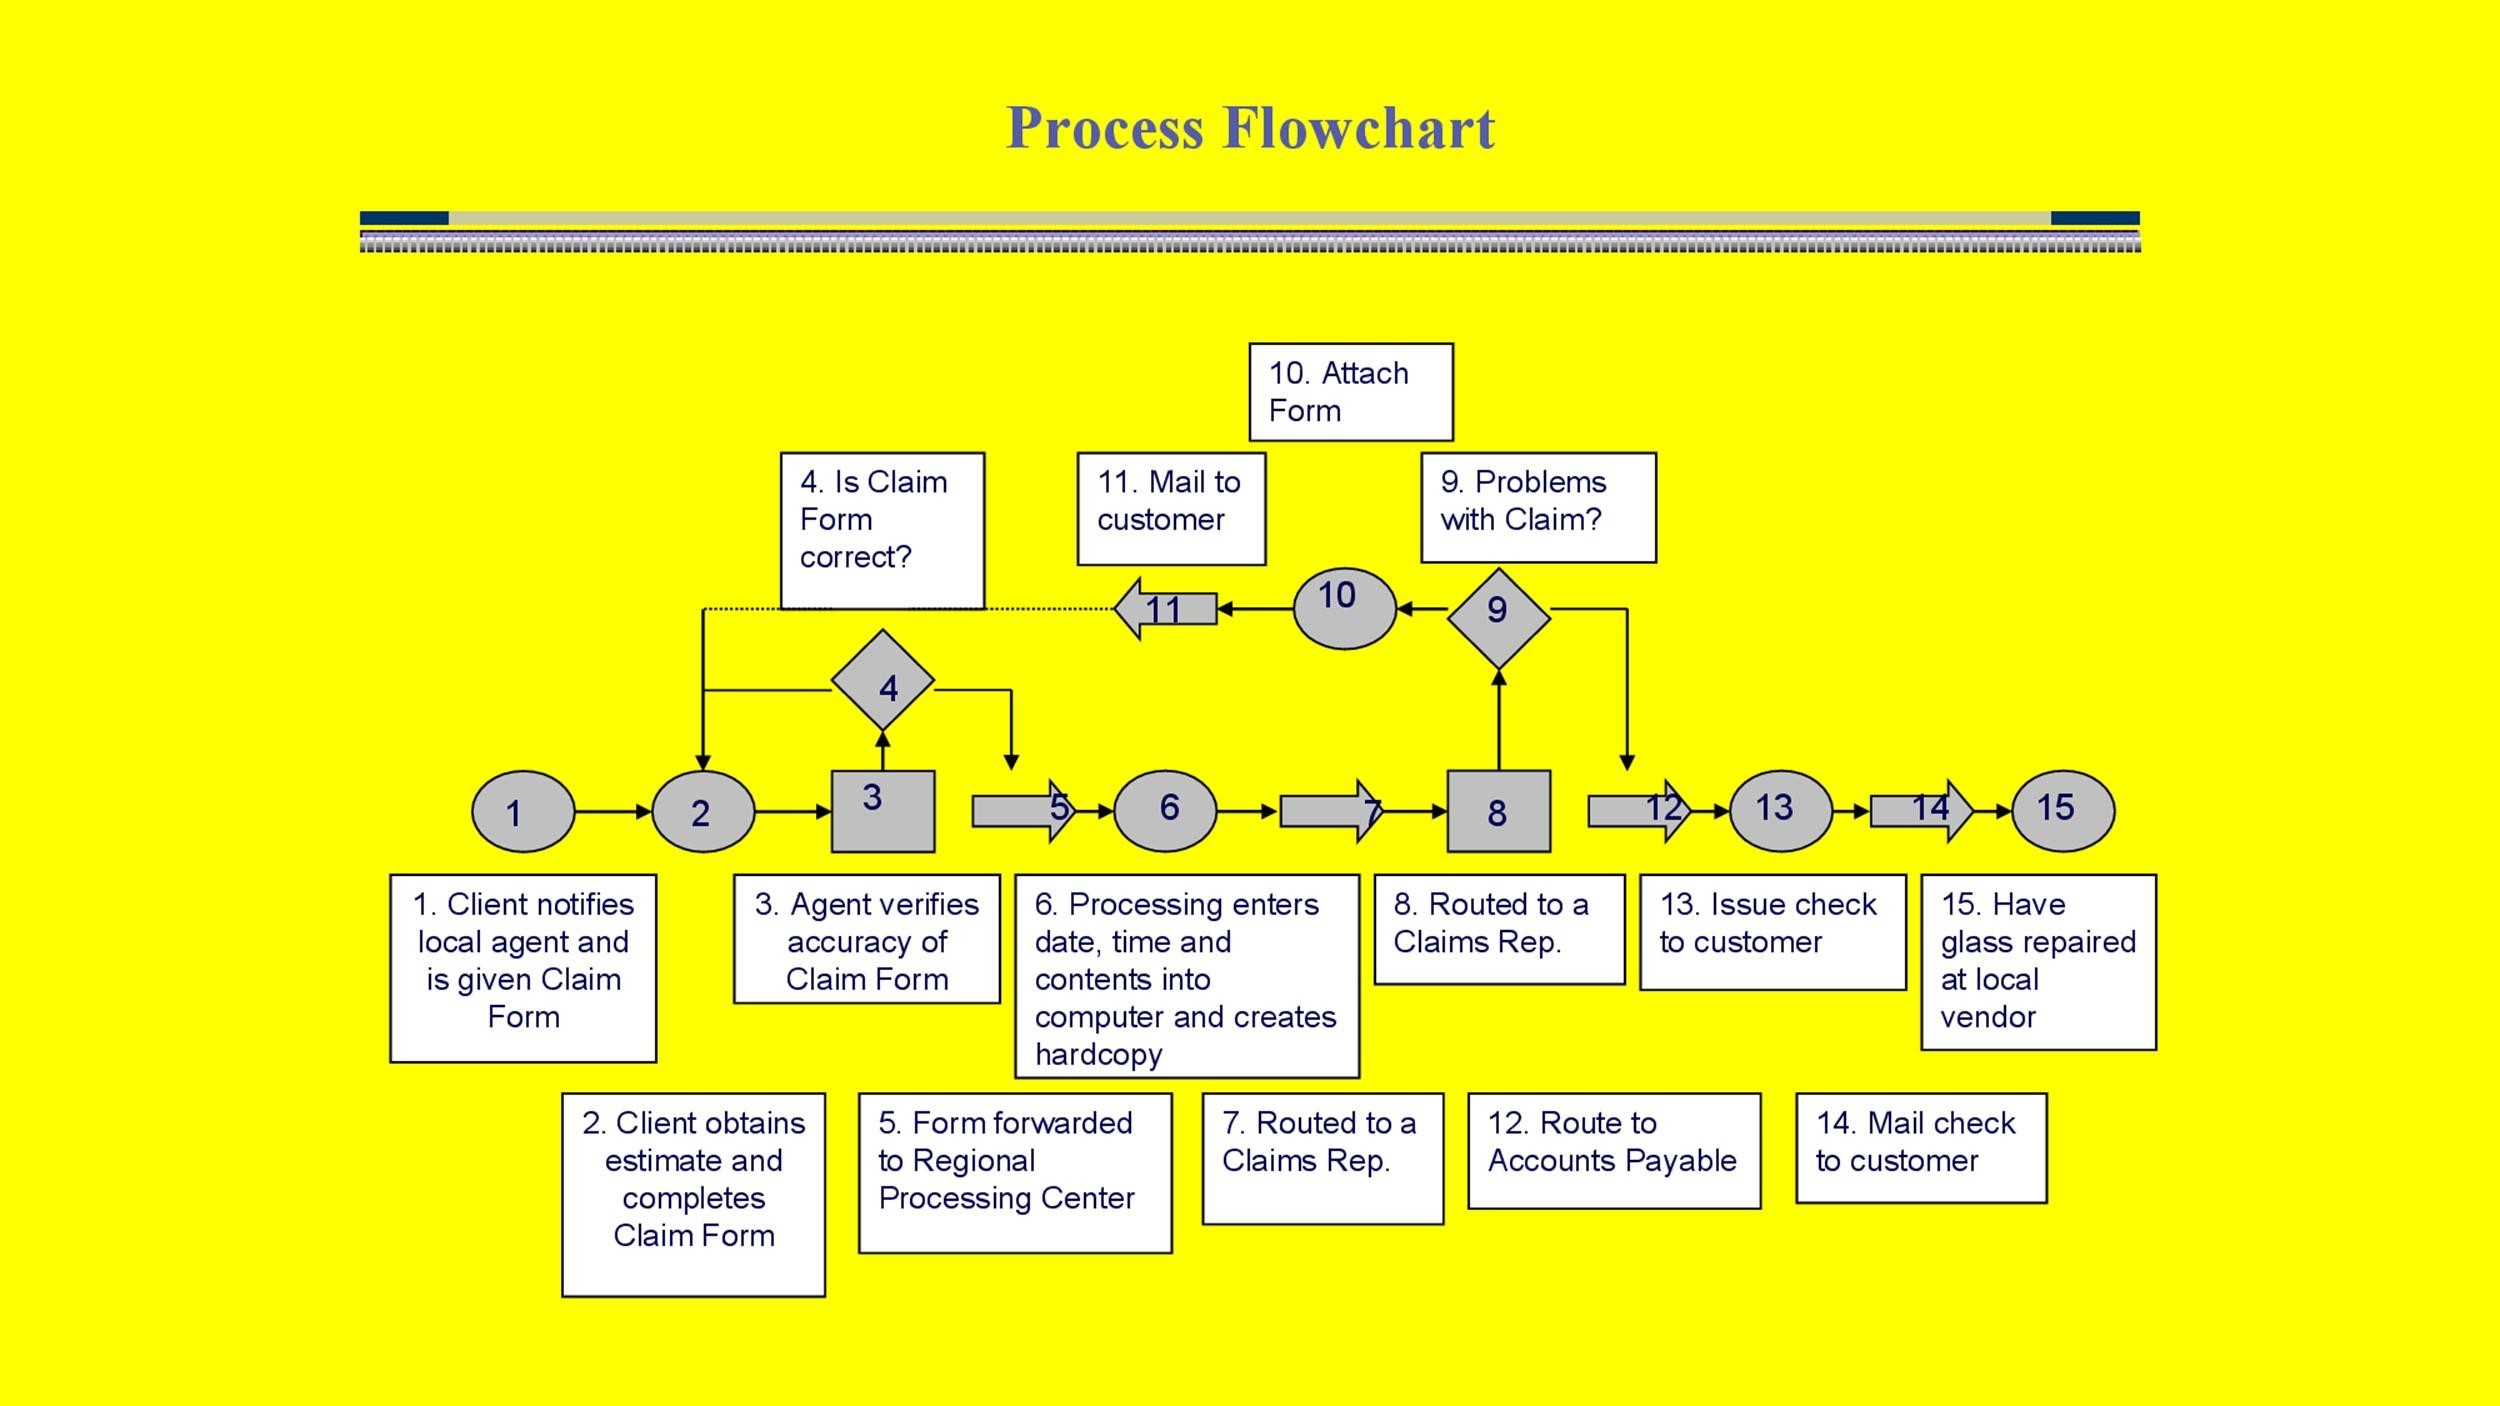 Flow Chart Powerpoint Template Free